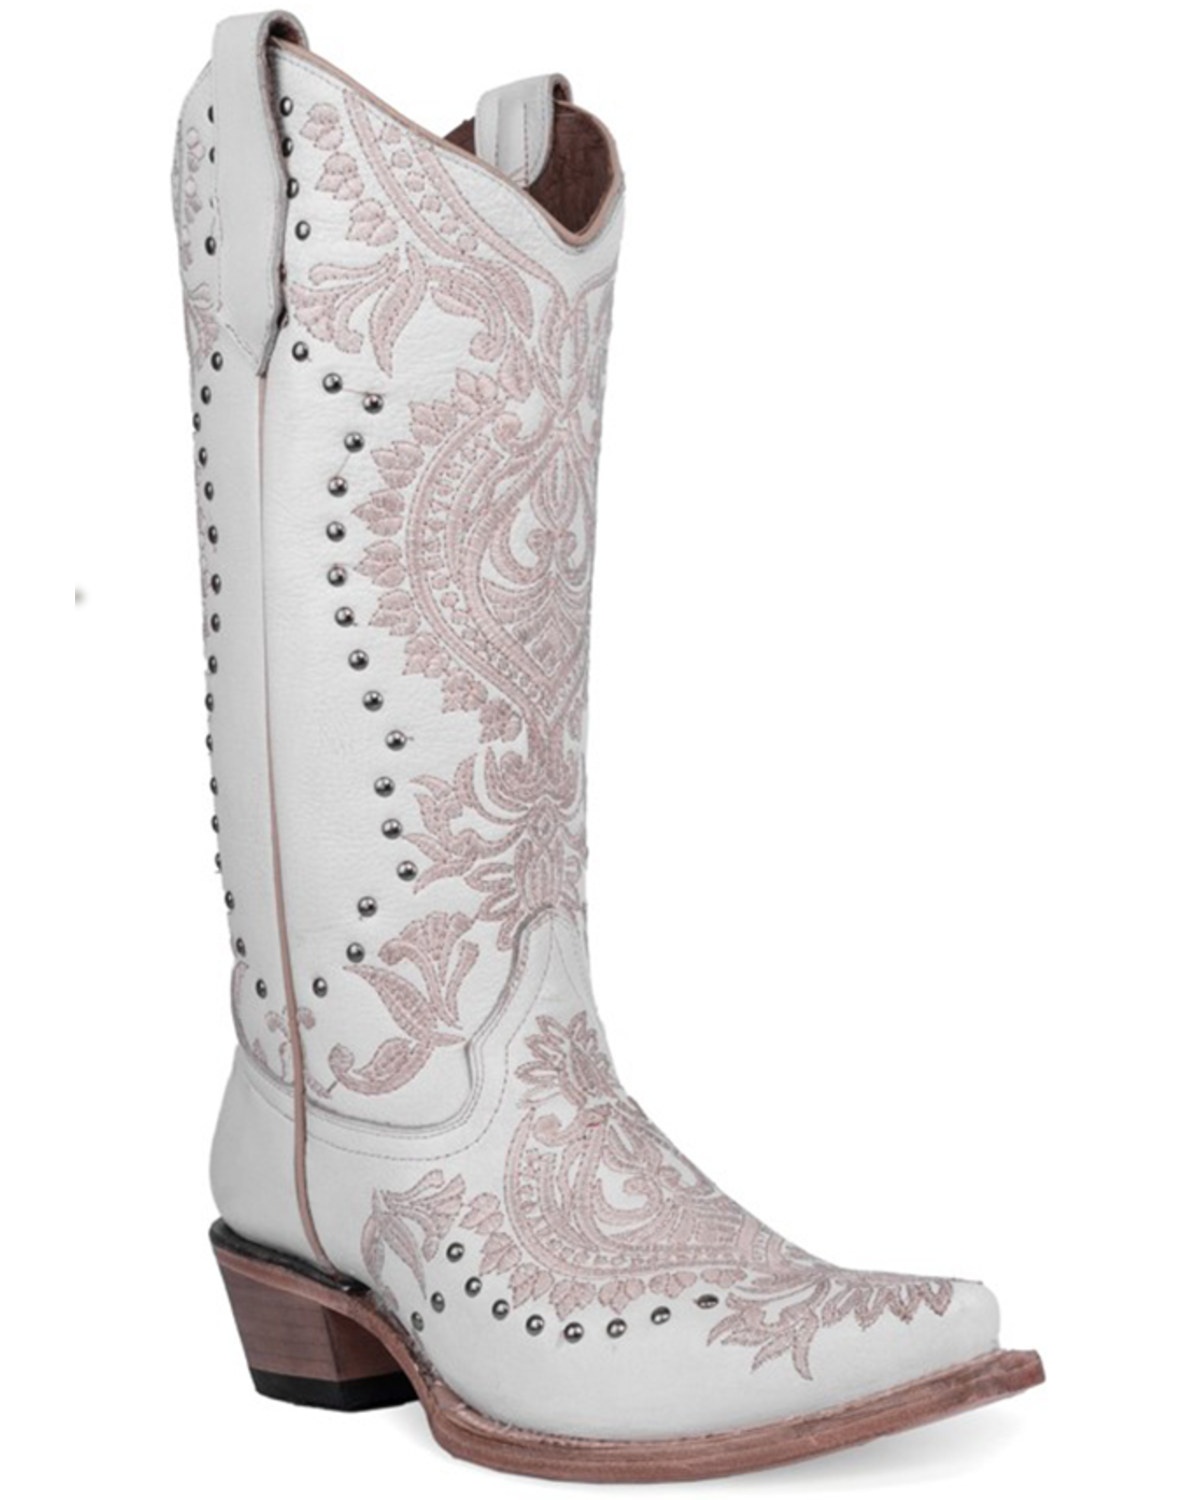 Corral Women's Embroidered and Studded Western Boots - Snip Toe